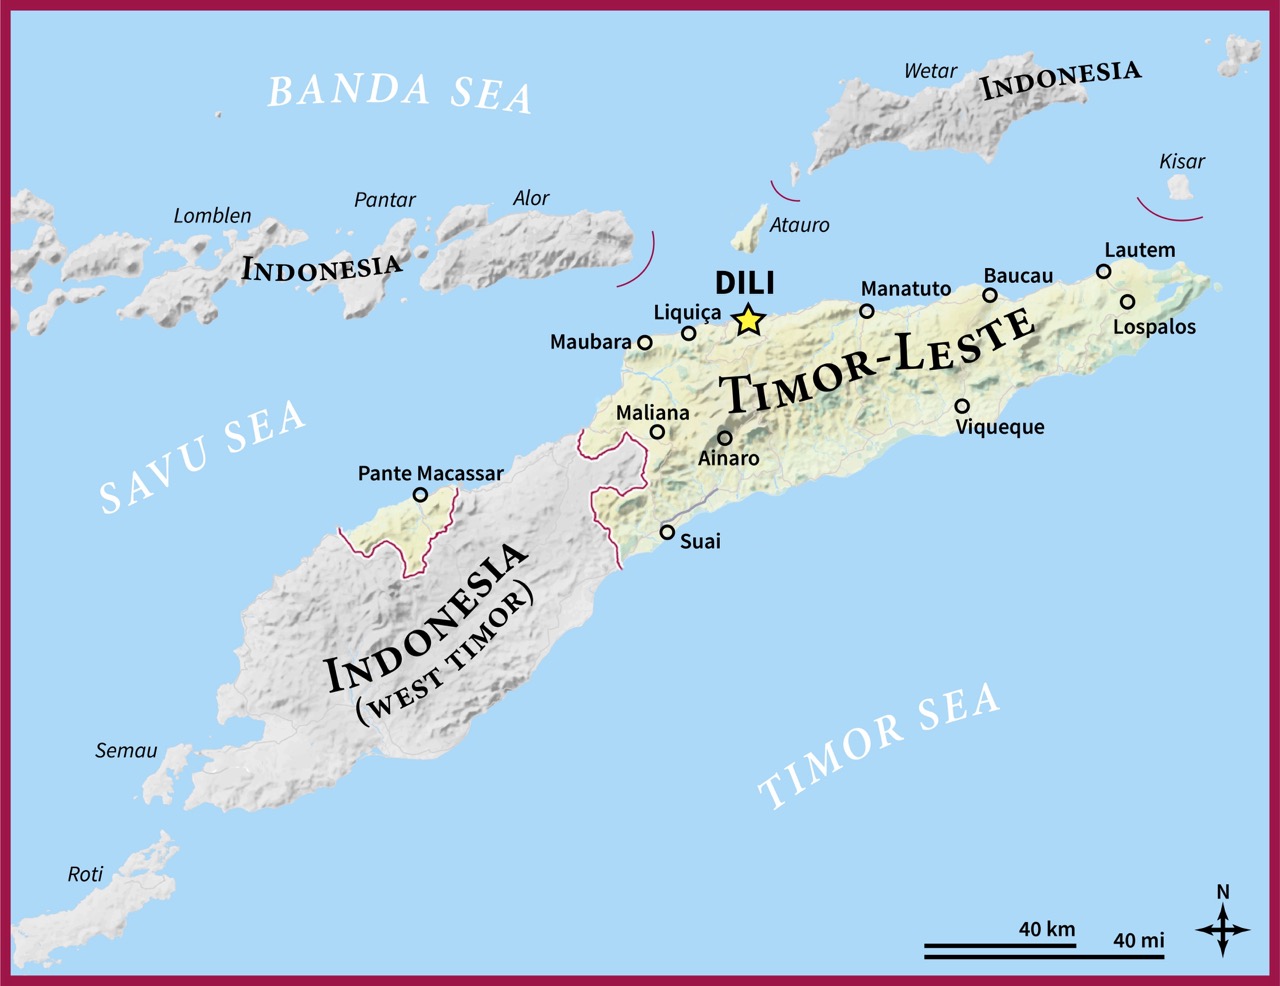 A map showing Timor-Leste's place beside the Banda Sea and Indonesia